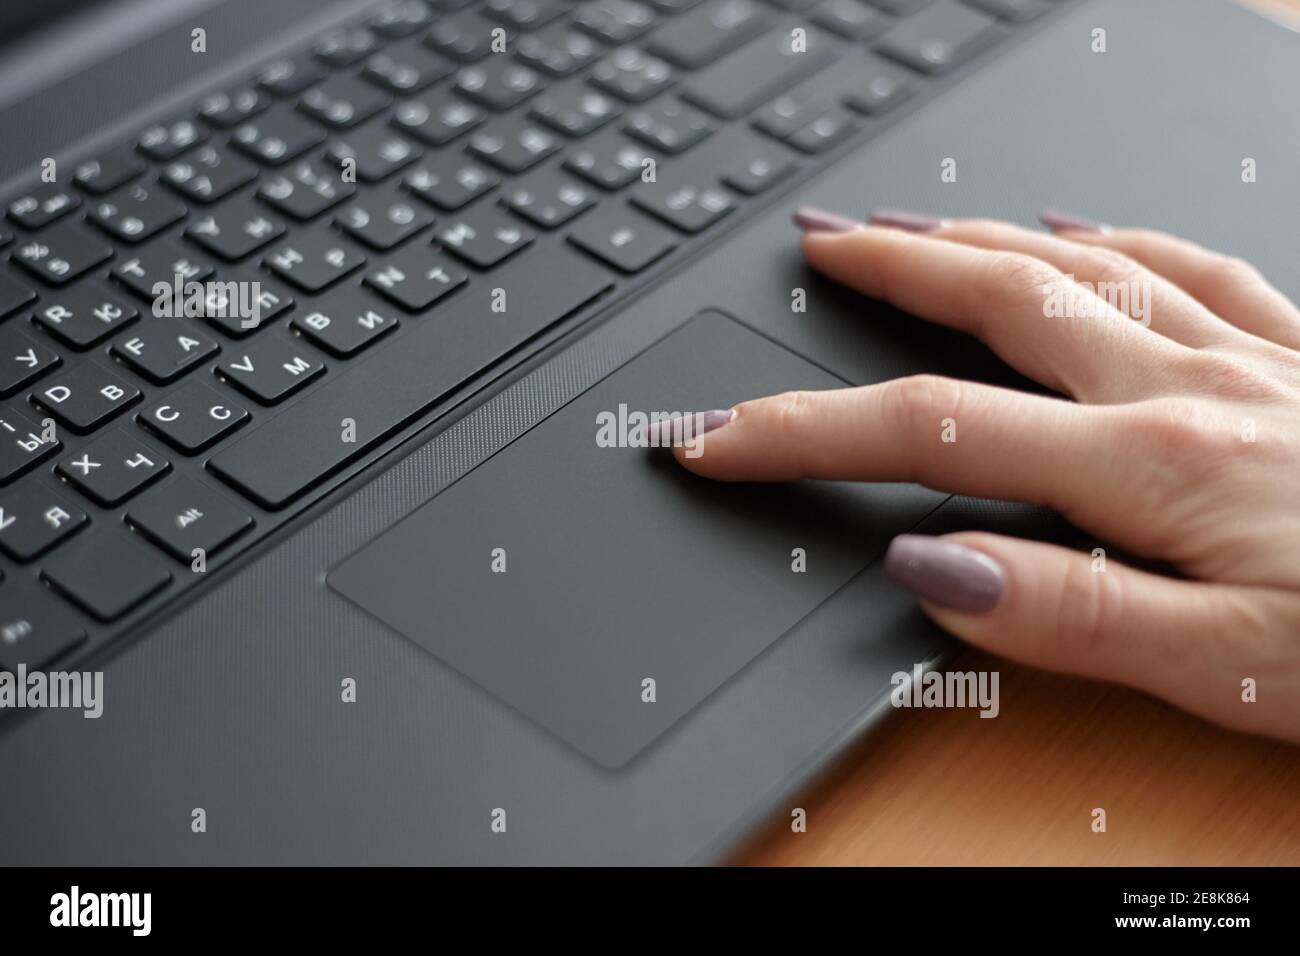 Female using black laptop for working. surfing internet using touchpad. business concept Stock Photo